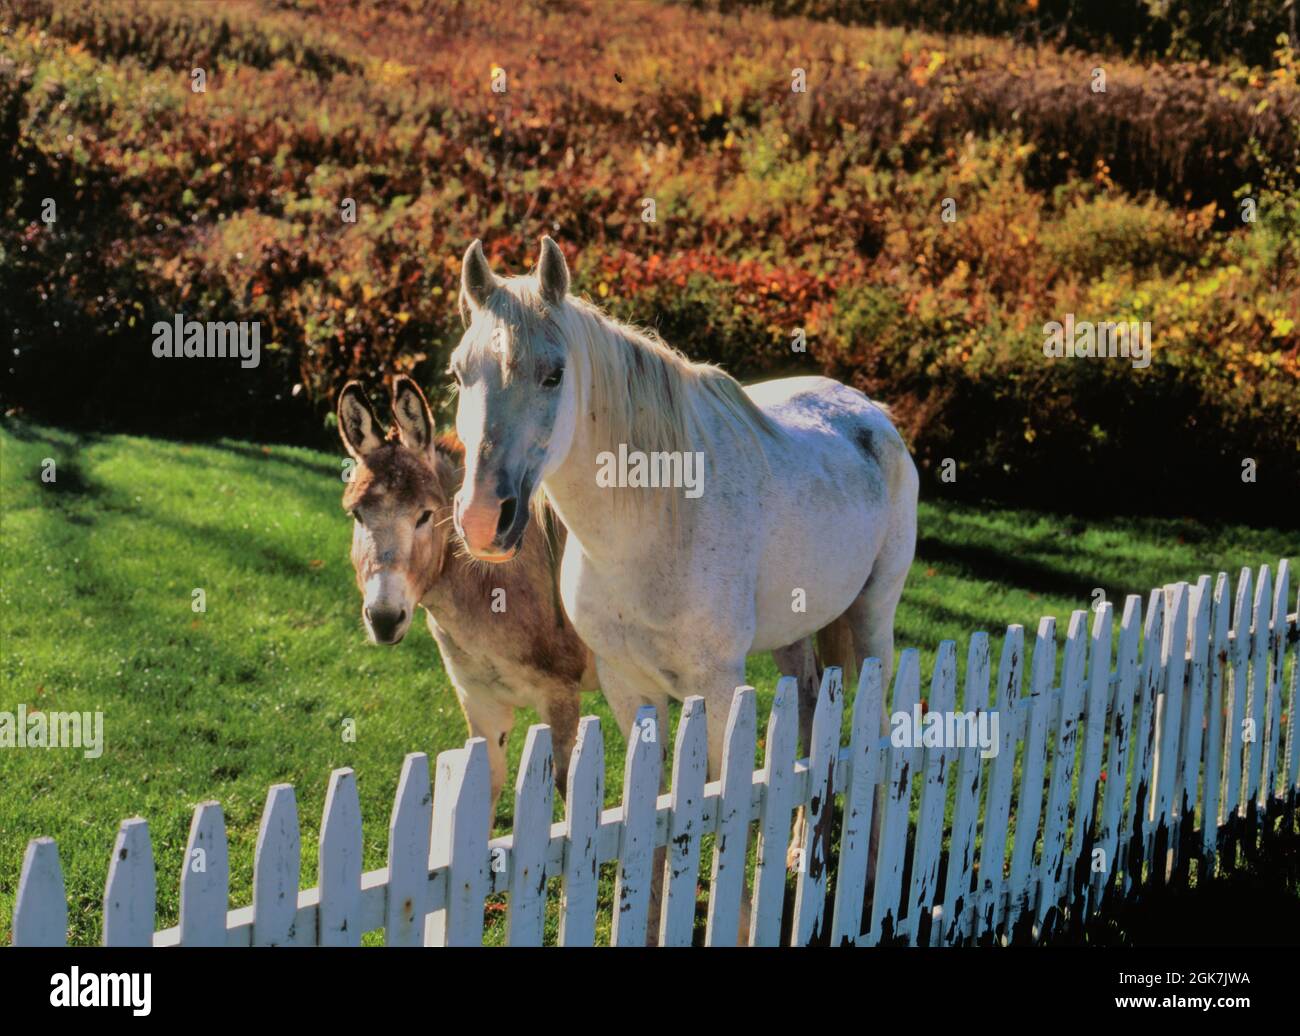 White horse and donkey in Vermont autumn landscape Stock Photo